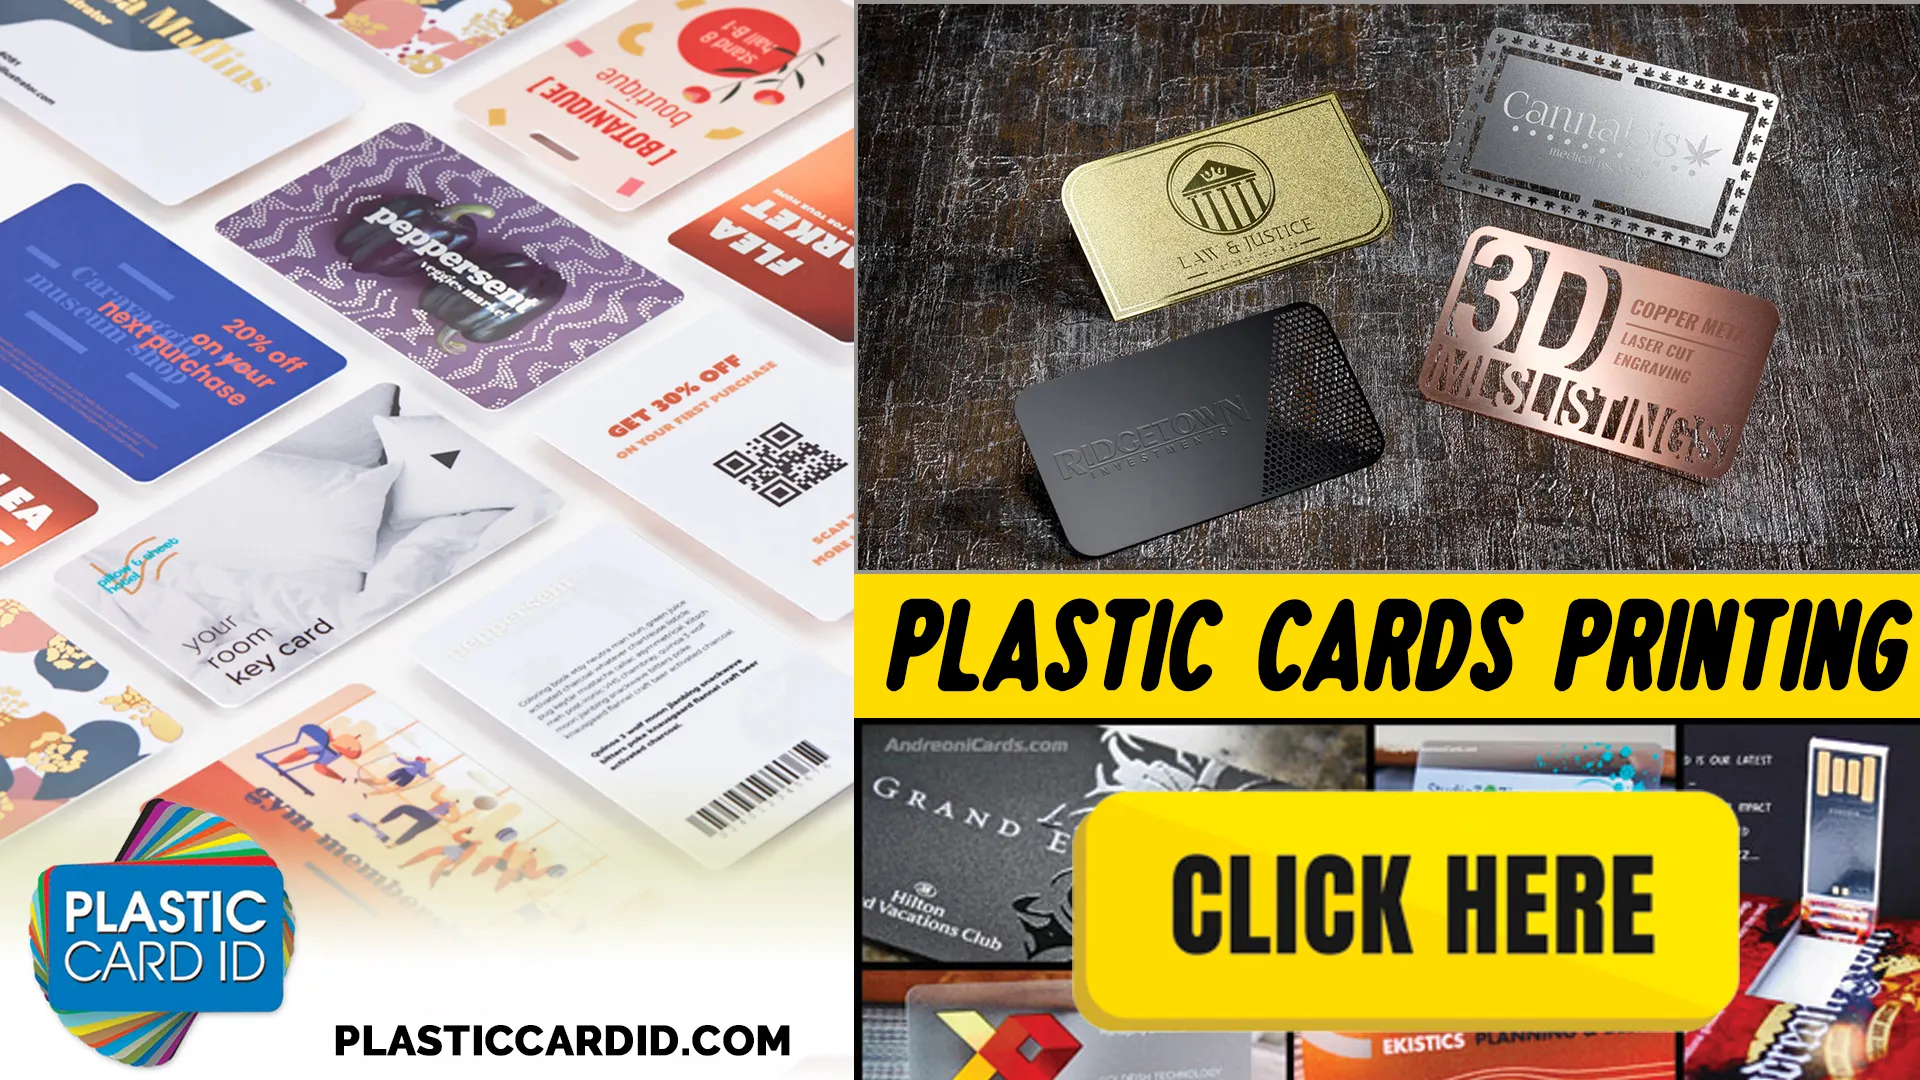 Nurturing the Appearance and Effectiveness of Plastic Cards